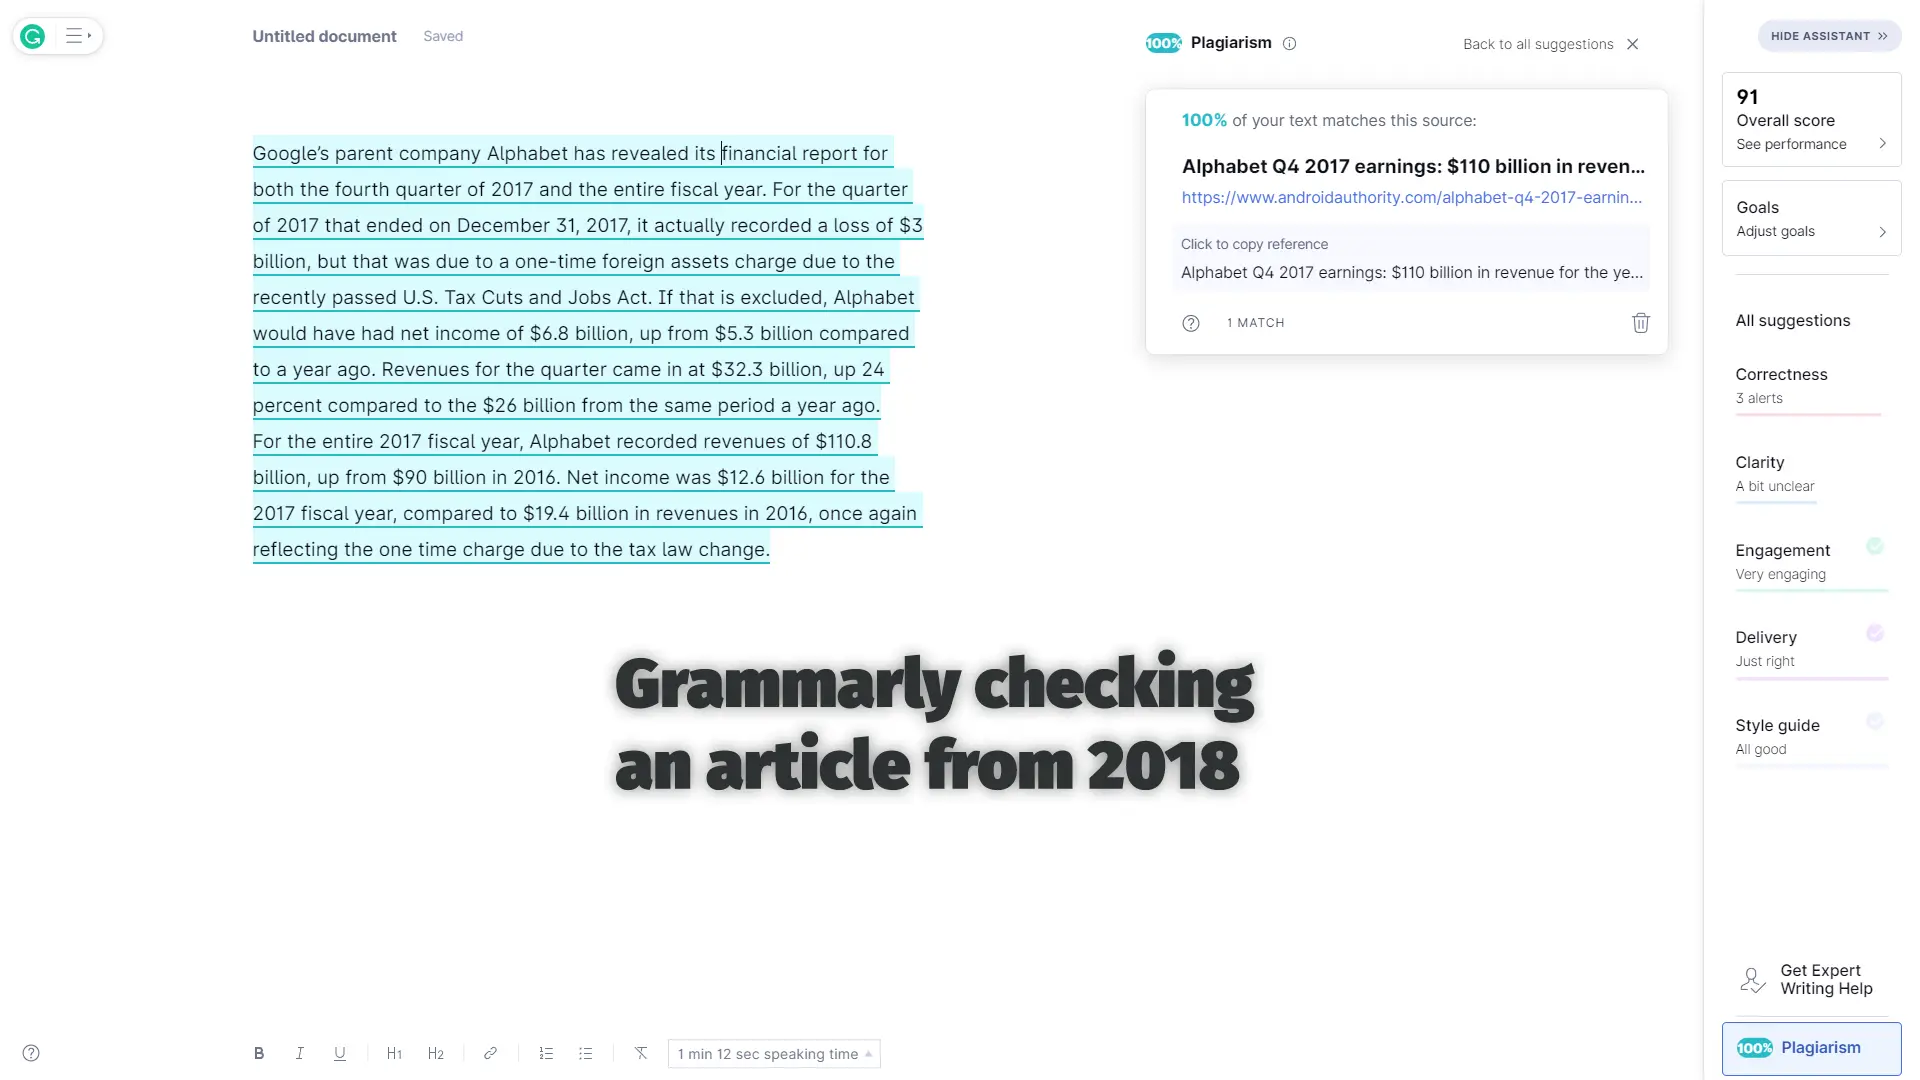 Grammarly Plagiarism Checker Checking a Five Year Old Article